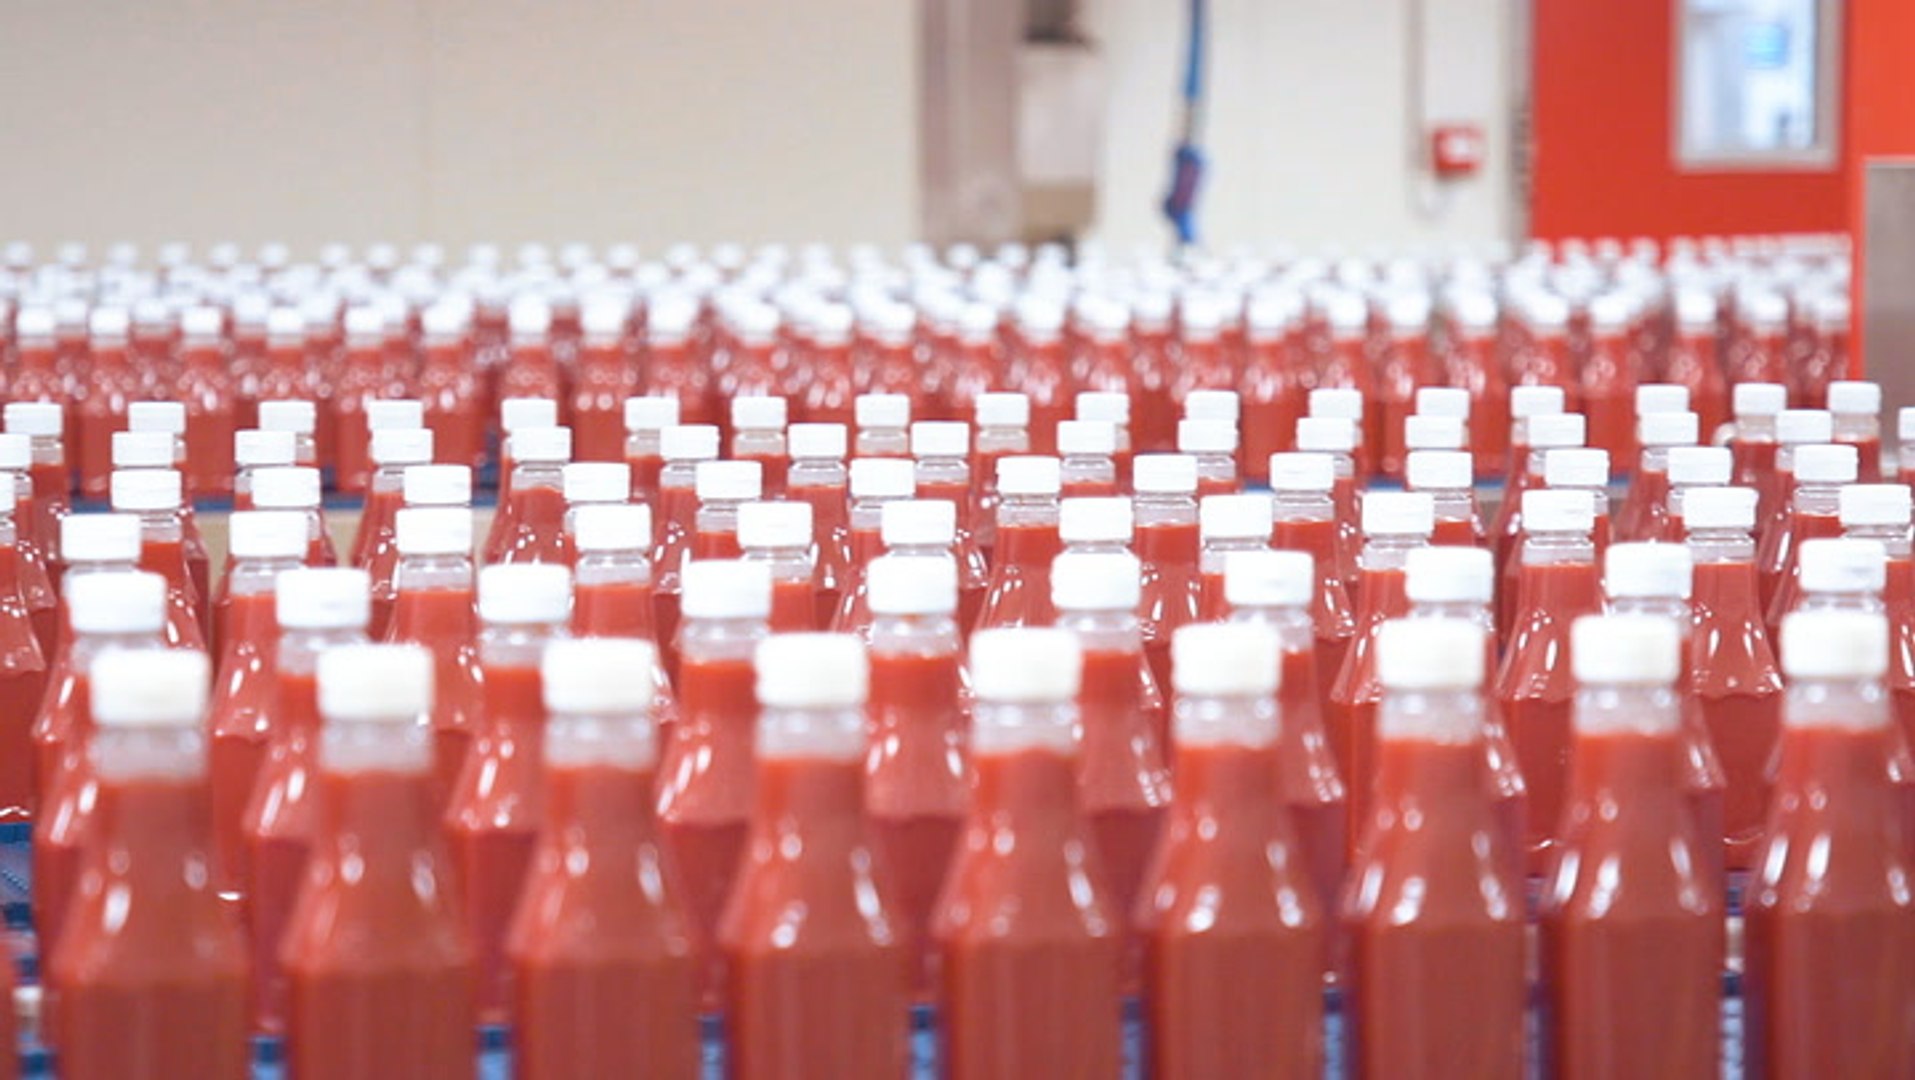 How Heinz Tomato Ketchup is made